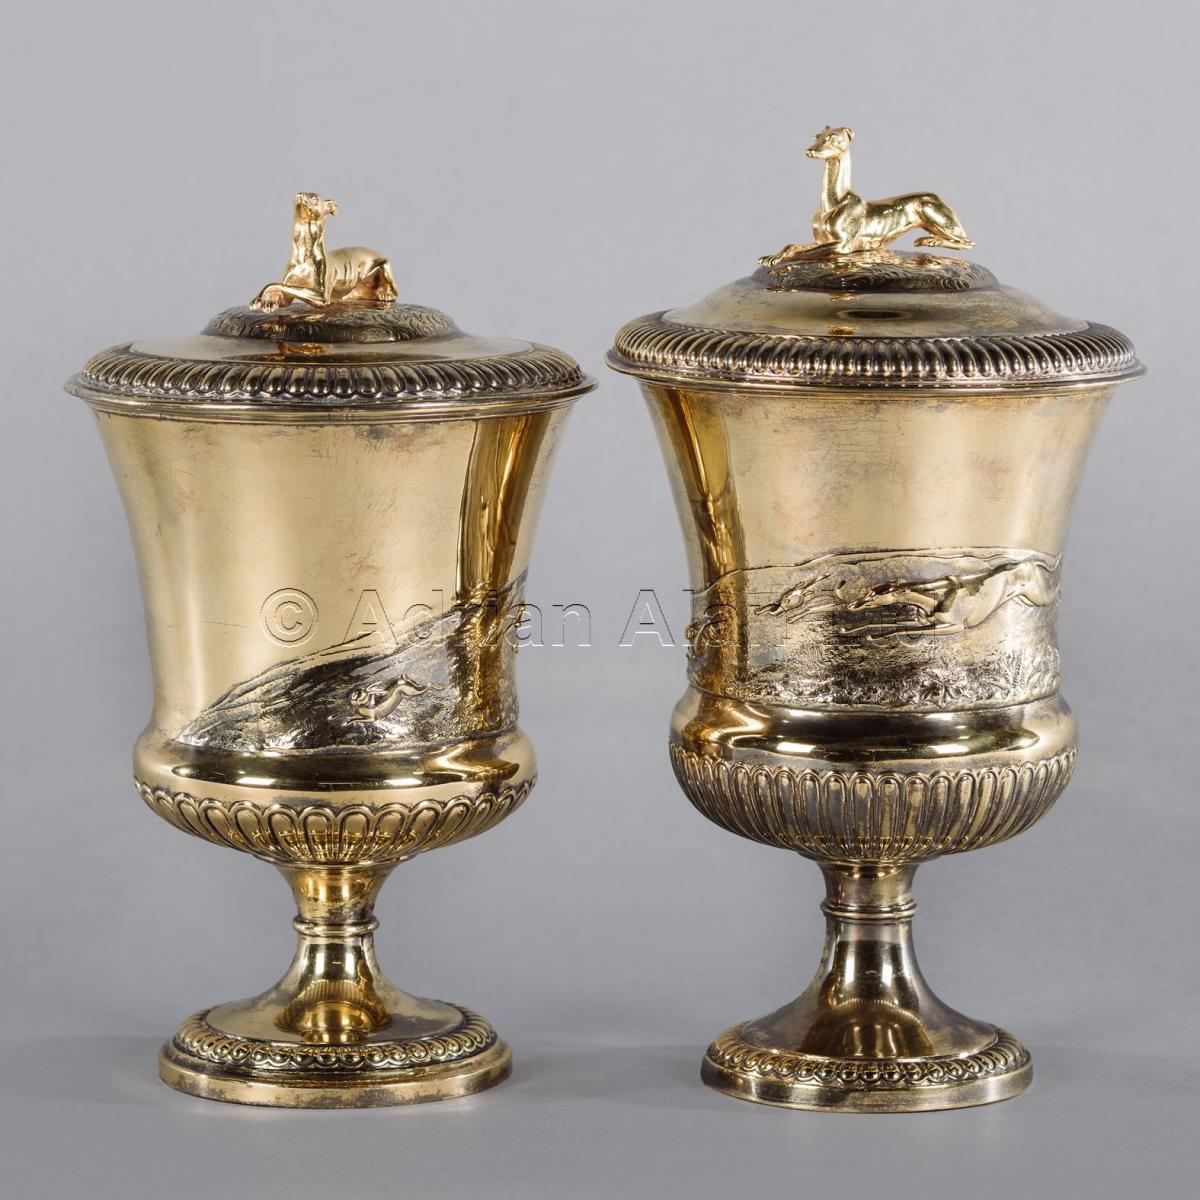 Pair of George IV Silver-Gilt Cup